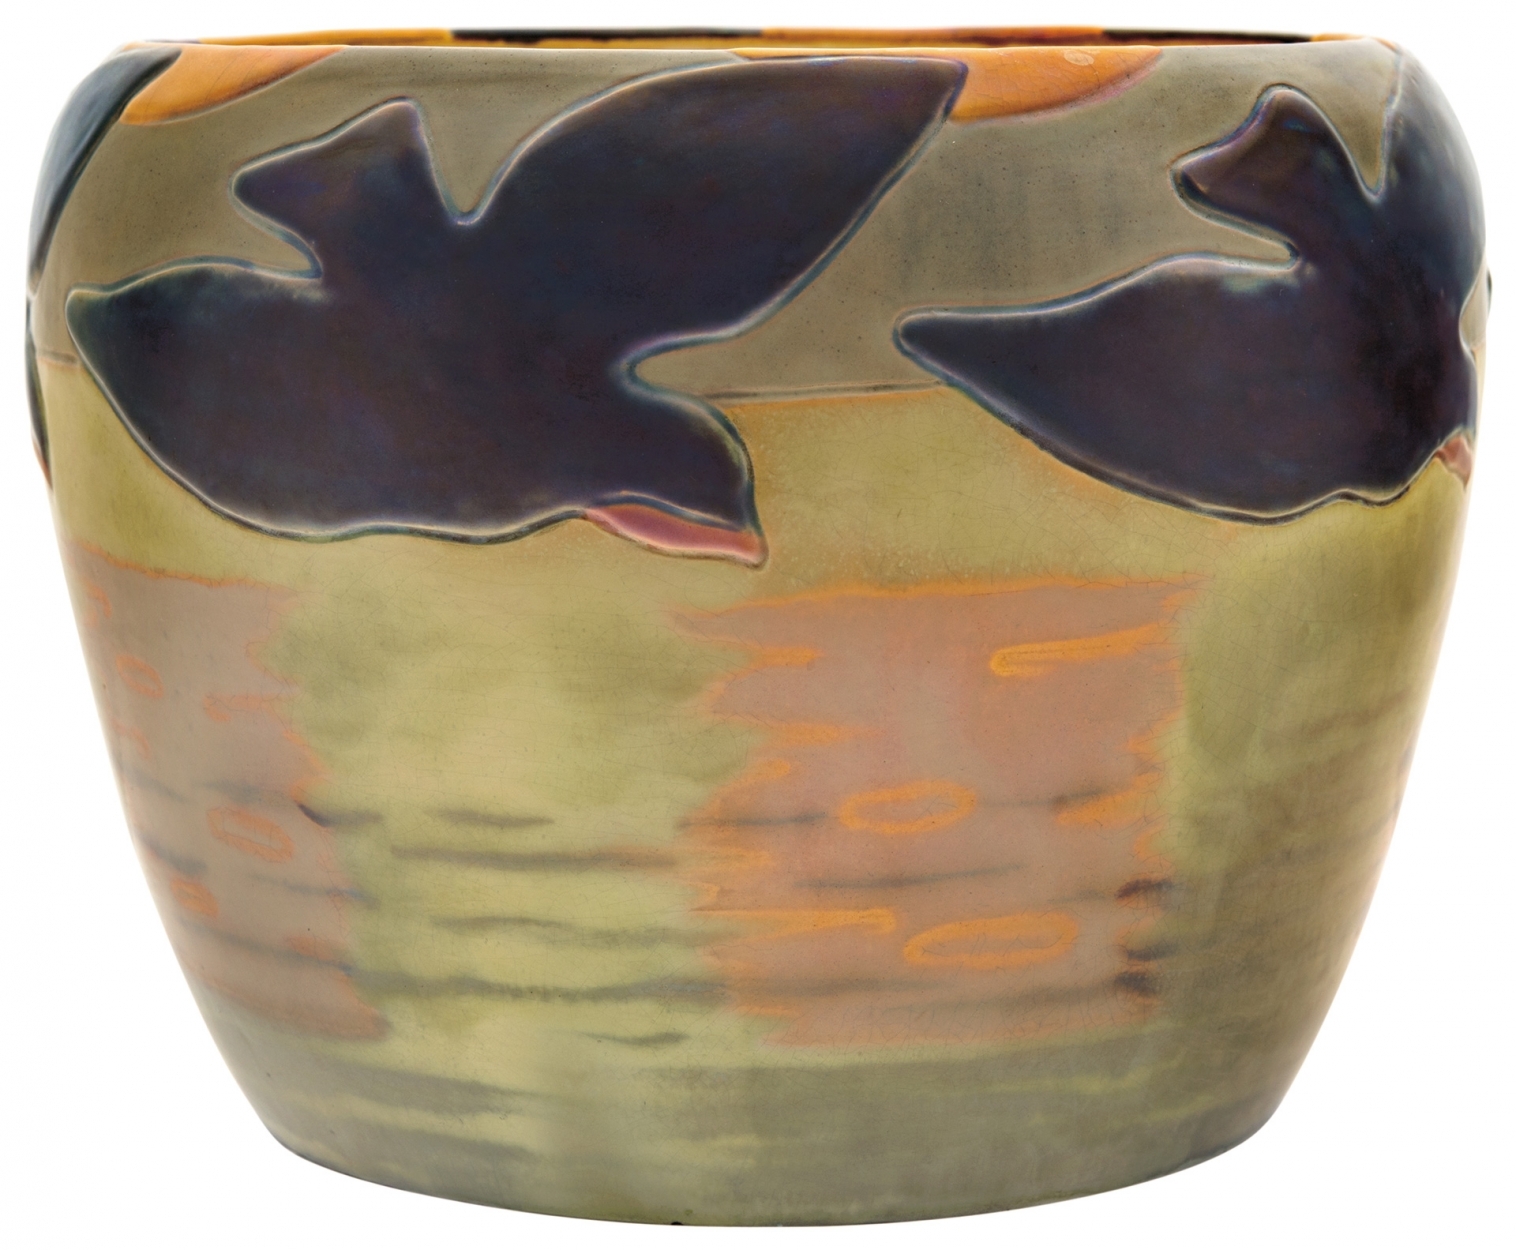 Zsolnay Vase with Panorama of Birds Flying above Waters, Zsolnay, around 1905